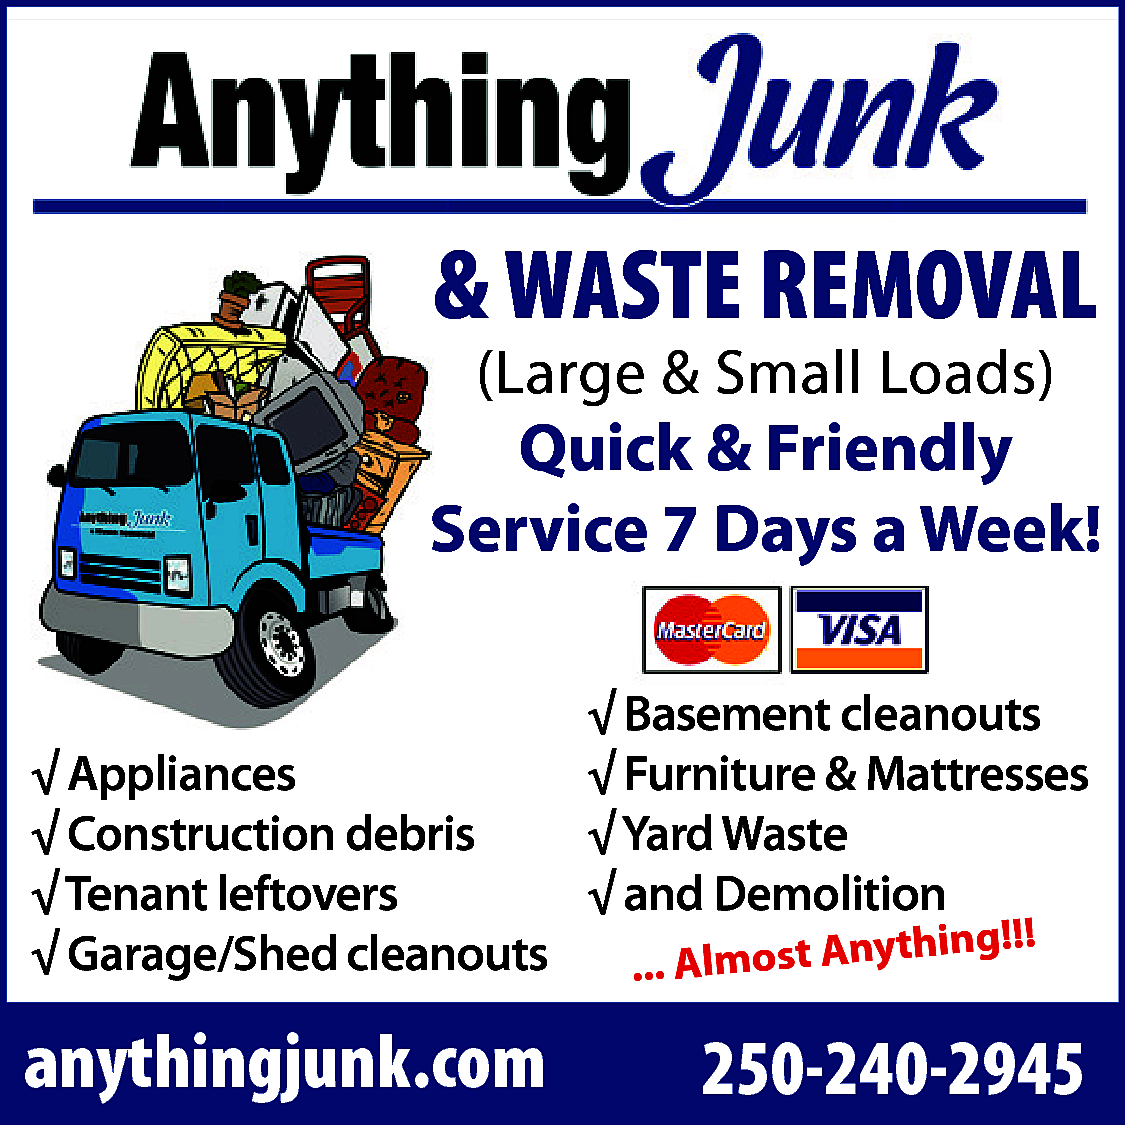 & WASTE REMOVAL <br>(Large &  & WASTE REMOVAL  (Large & Small Loads)    Quick & Friendly  Service 7 Days a Week!  √ Basement cleanouts  √ Appliances  √ Furniture & Mattresses  √ Construction debris  √ Yard Waste  √ Tenant leftovers  √ and Demolition  hing!!!  √ Garage/Shed cleanouts  ... Almost Anyt    anythingjunk.com    250-240-2945    